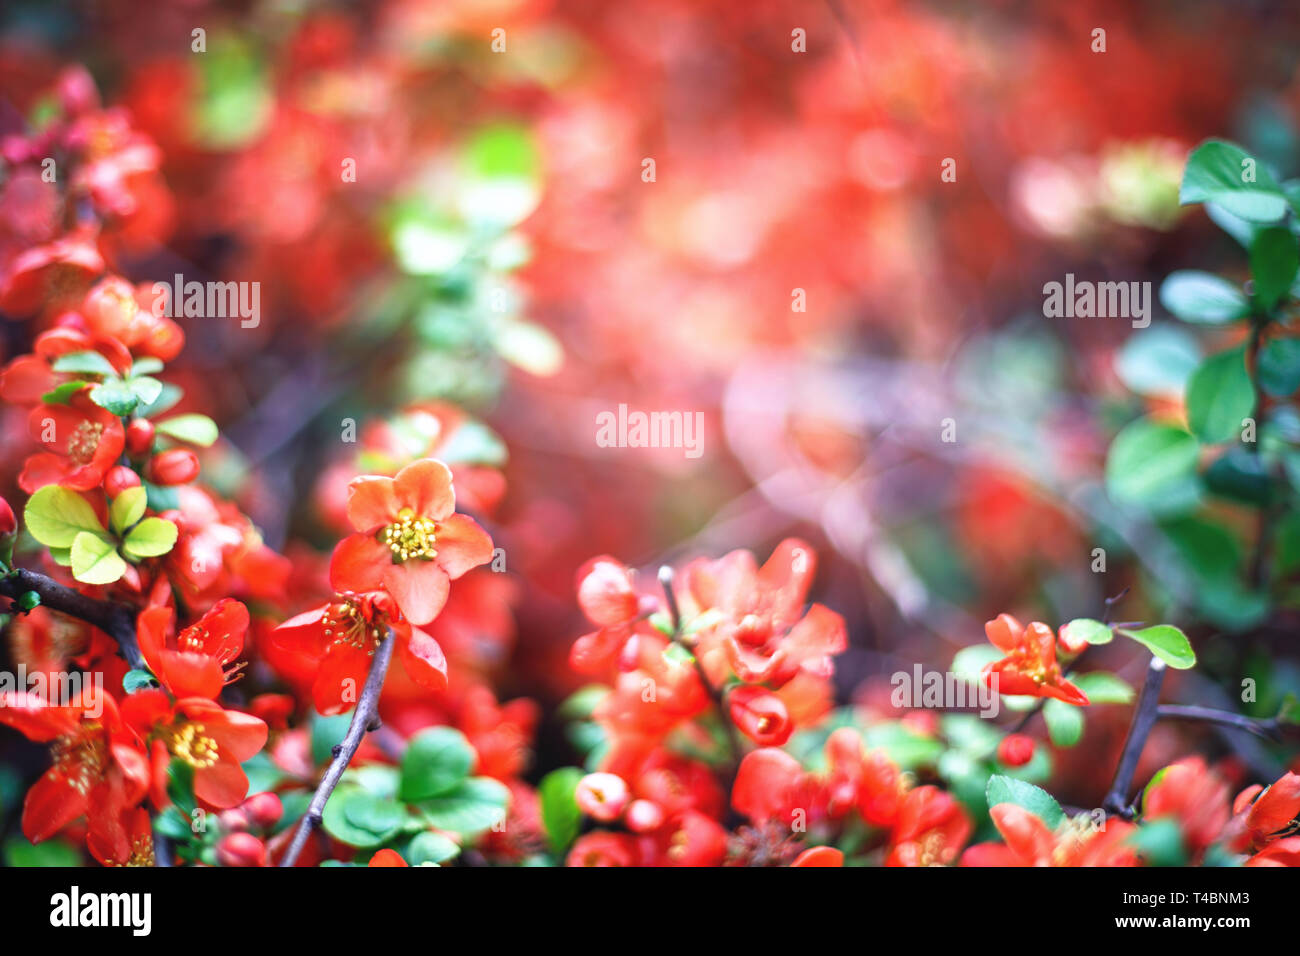 Bright flowering Japanese quince or Chaenomeles japonica. Branch covered with lot of red flowers on blurred green background with leaves bokeh. Bright Stock Photo